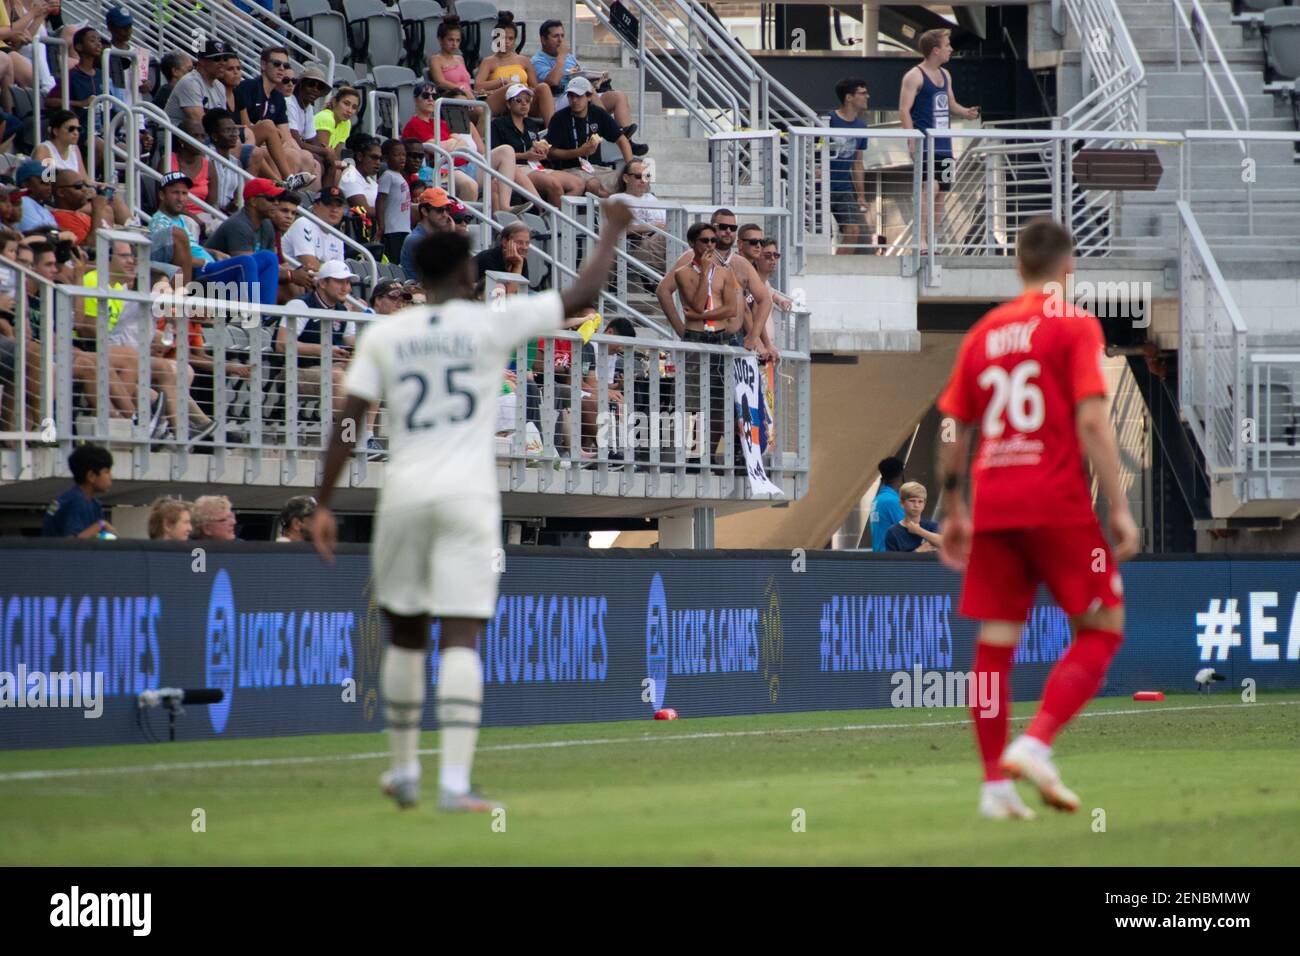 Spectators watch the 3rd place match between FC Girondins de Bordeaux and  Montpellier HSC in the EA Ligue 1 Tournament on July 21, 2019. The EA Ligue  1 Tournament is a four-team